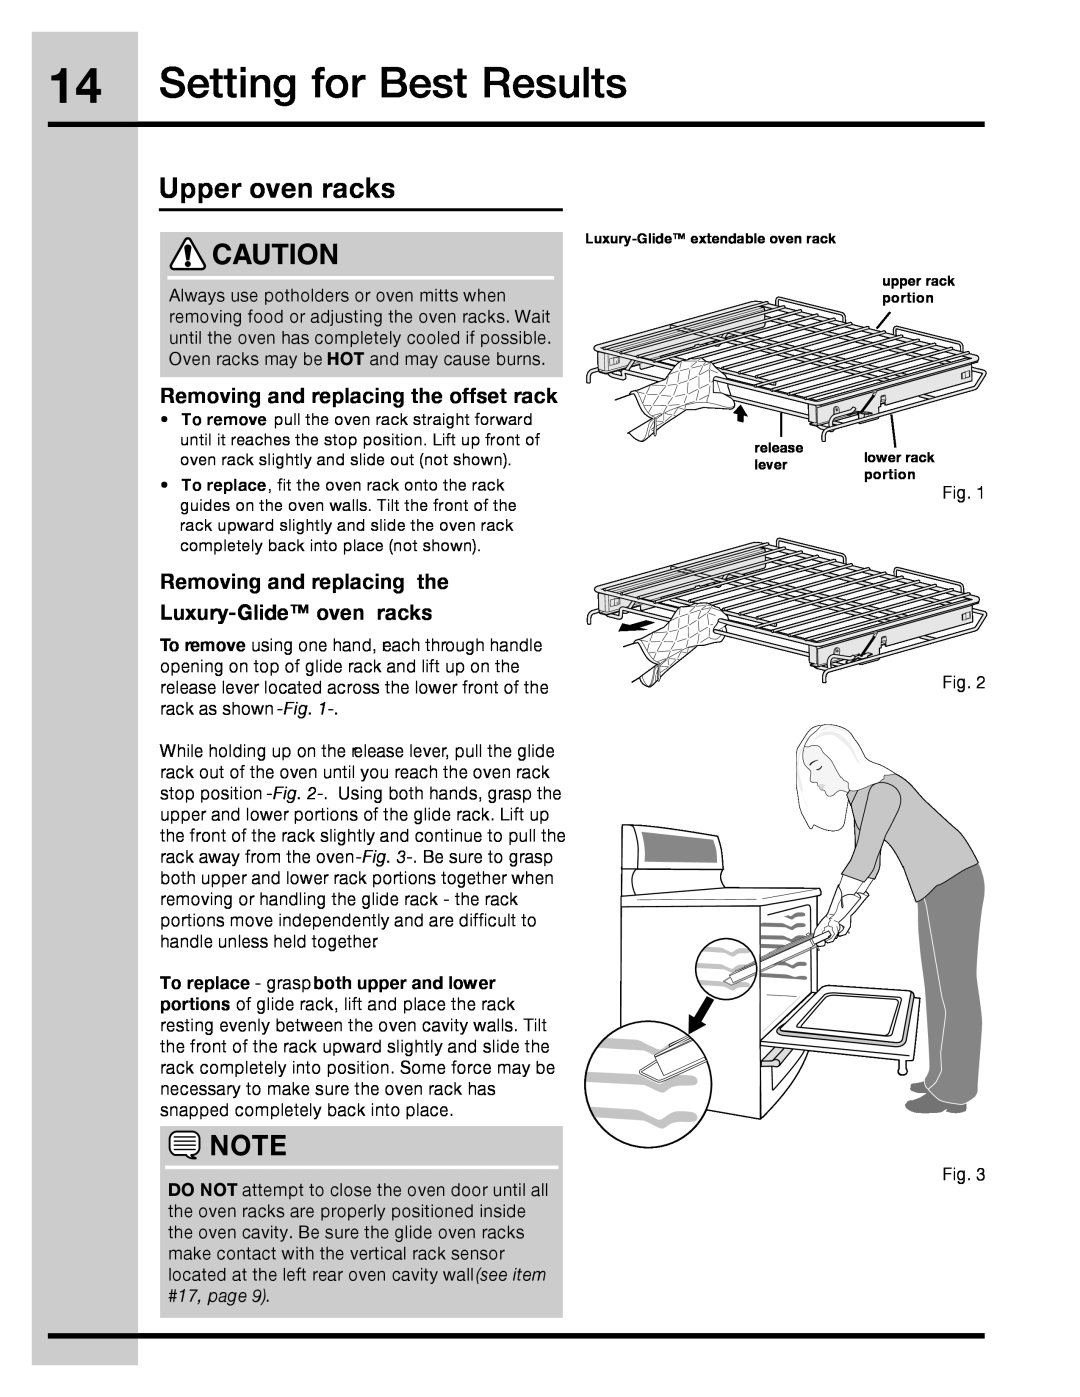 Electrolux 316471110 manual Setting for Best Results, Removing and replacing the offset rack, Upper oven racks 